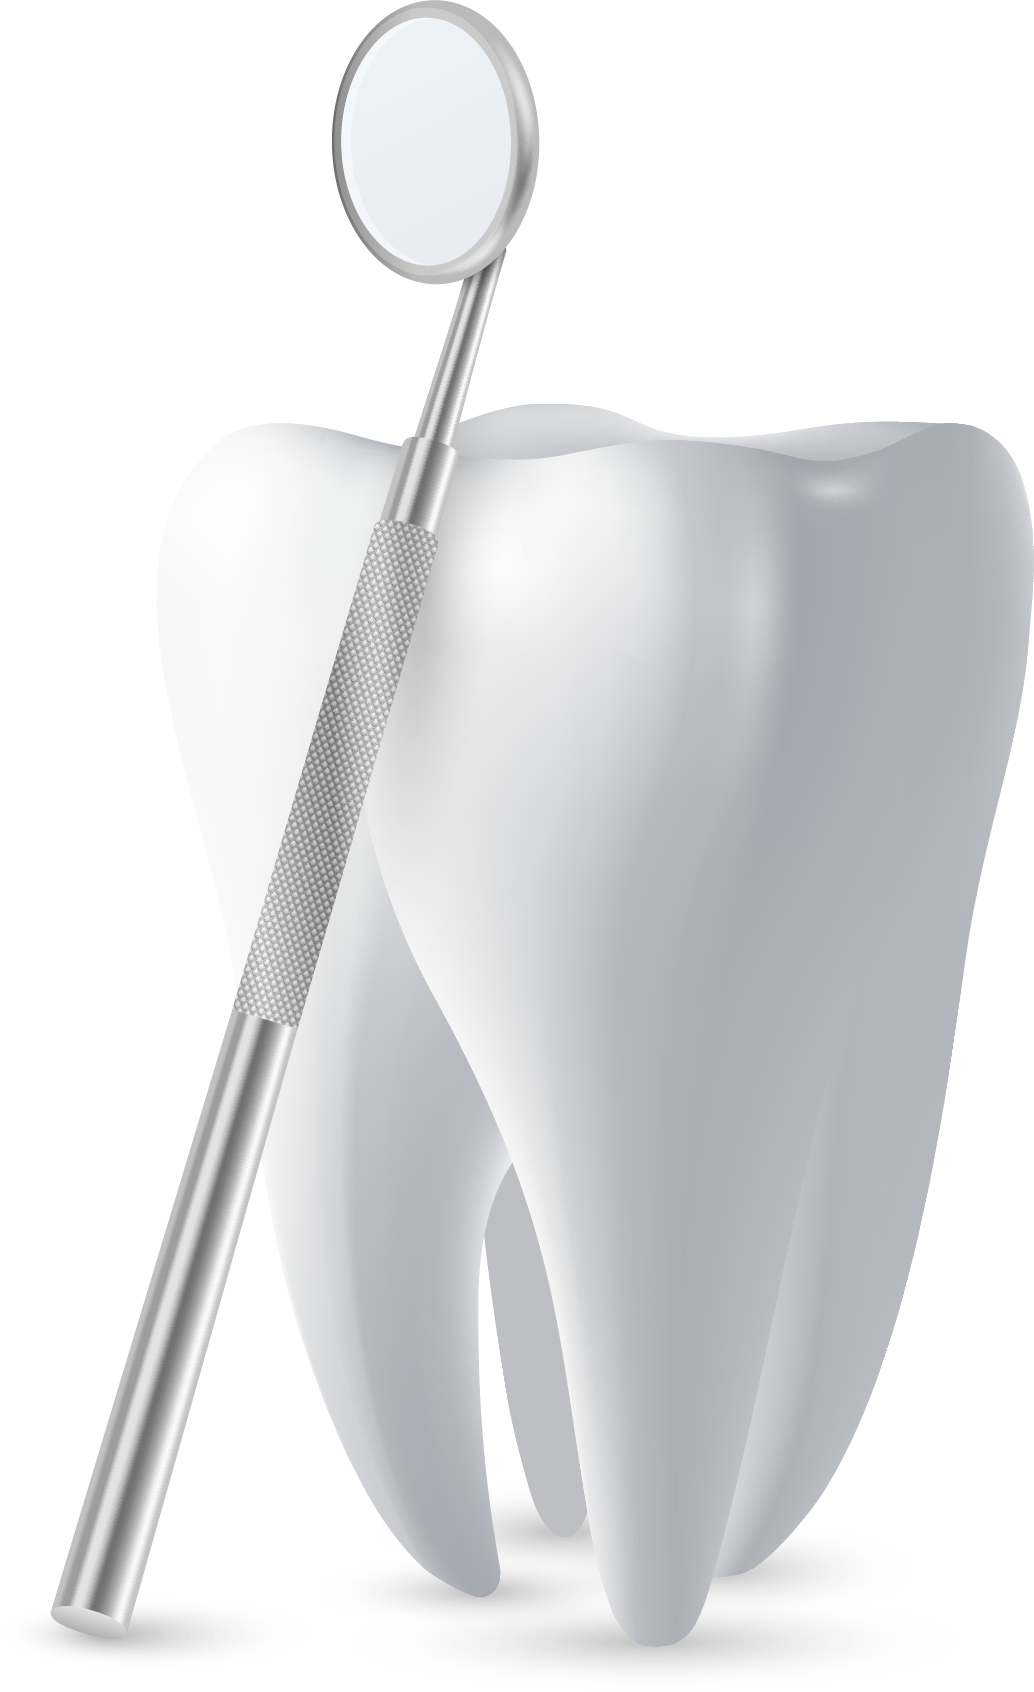 Tooth with Dentistry Equipment 5 - Charlotte, NC - Northlake Dentistry